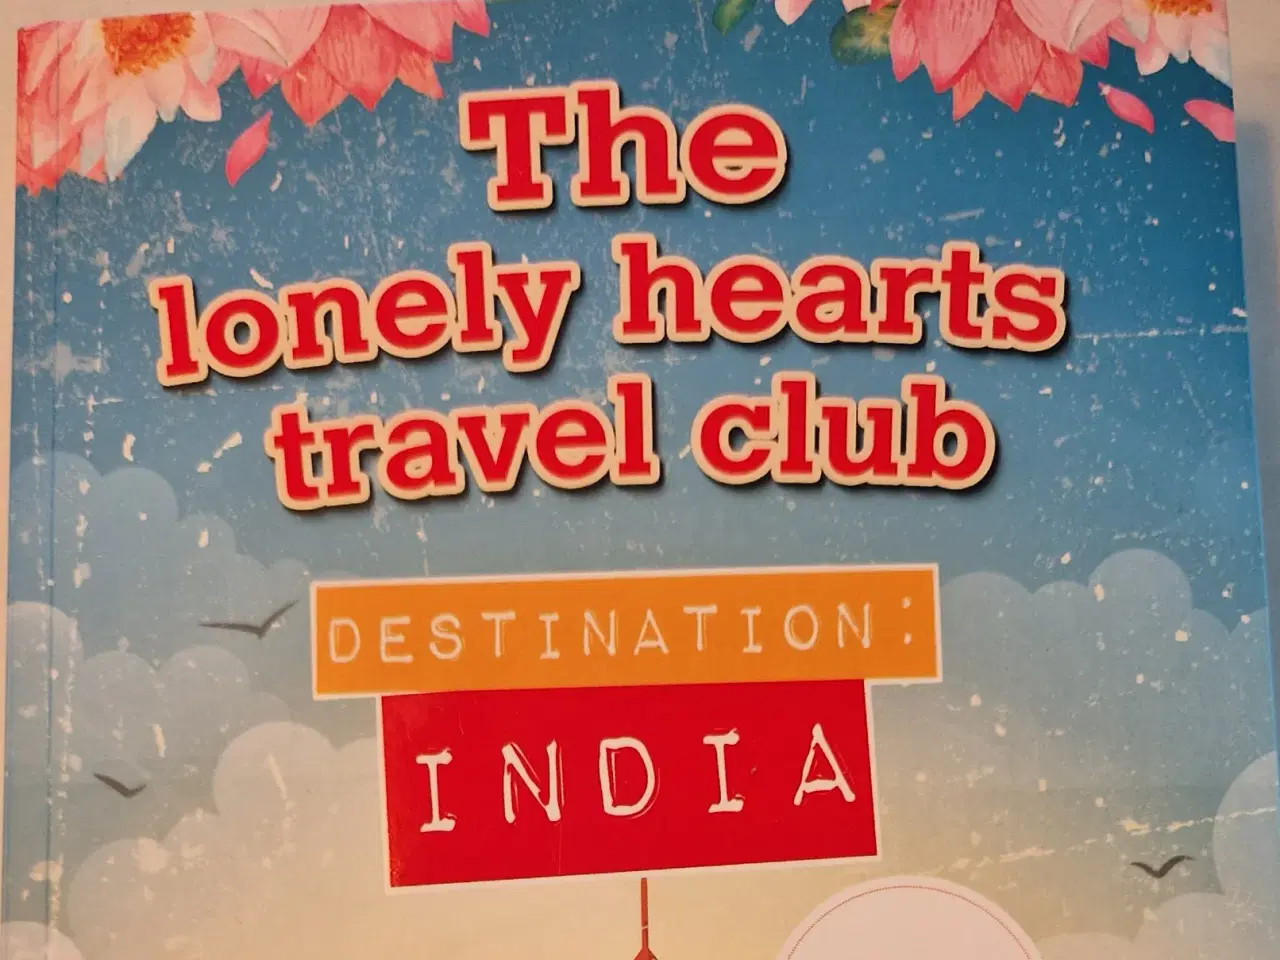 Billede 1 - The lonely hearts travel  club India, Katy Colin, 